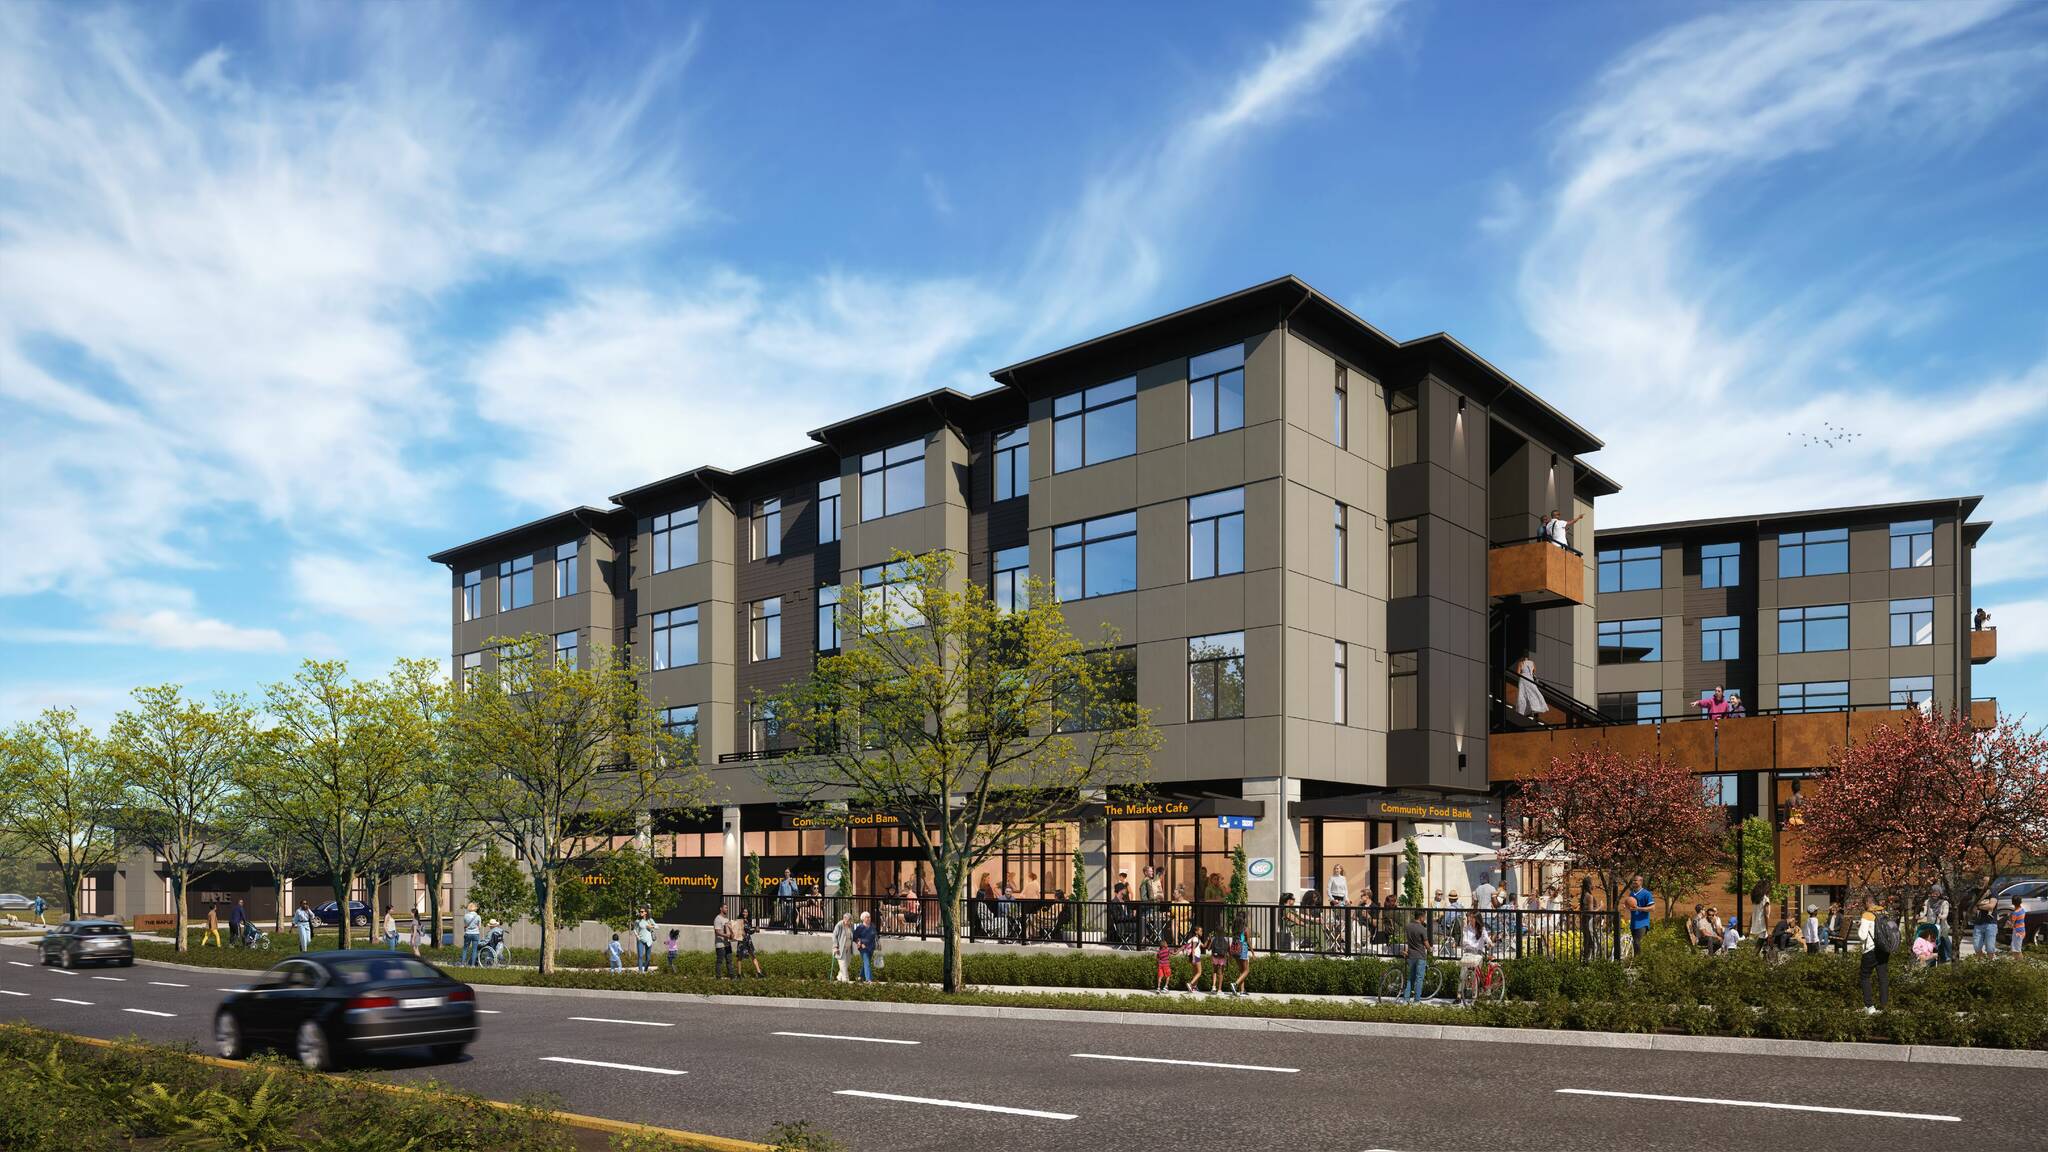 This architectural rendering by Bumgardner Architects shows what the finished Redondo Heights development might look like from the street view level.